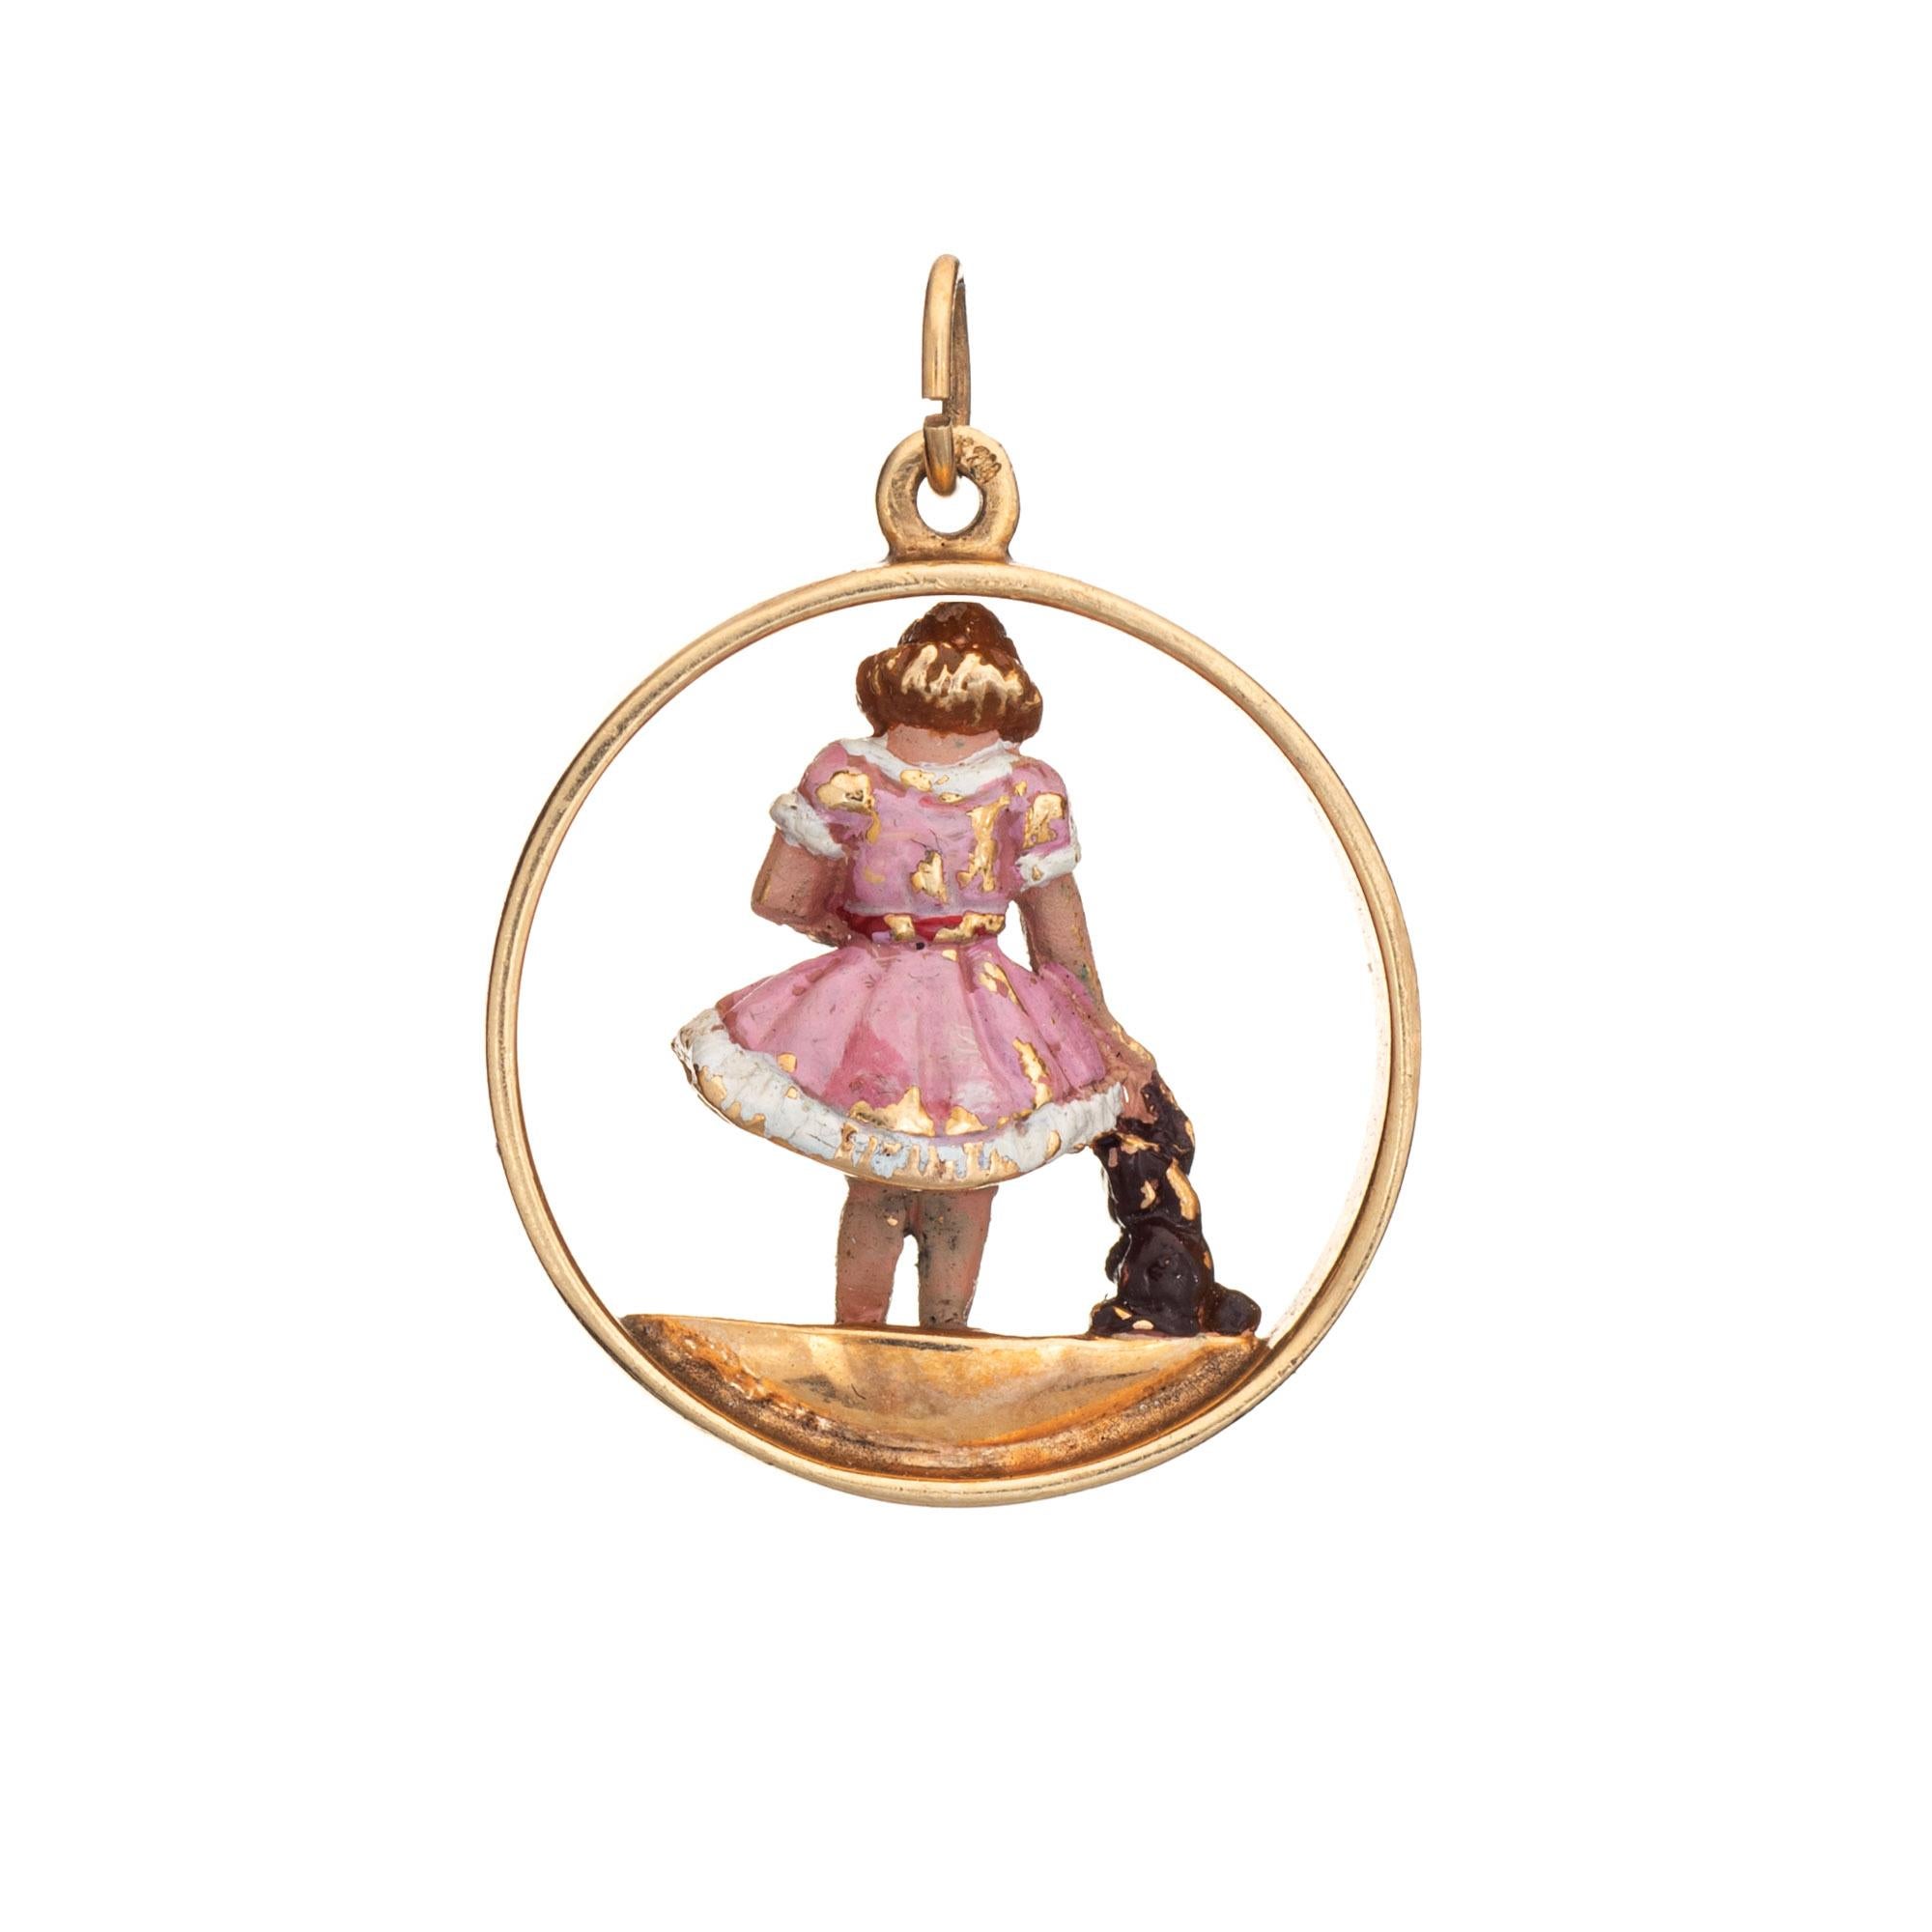 Finely detailed vintage charm crafted in 14k yellow gold (circa 1940s to 1950s).  

The finely detailed charm features a young girl holding a toy with her hand comforting a dog. The figure is rendered in pink enamel (note: some loss to the enamel).